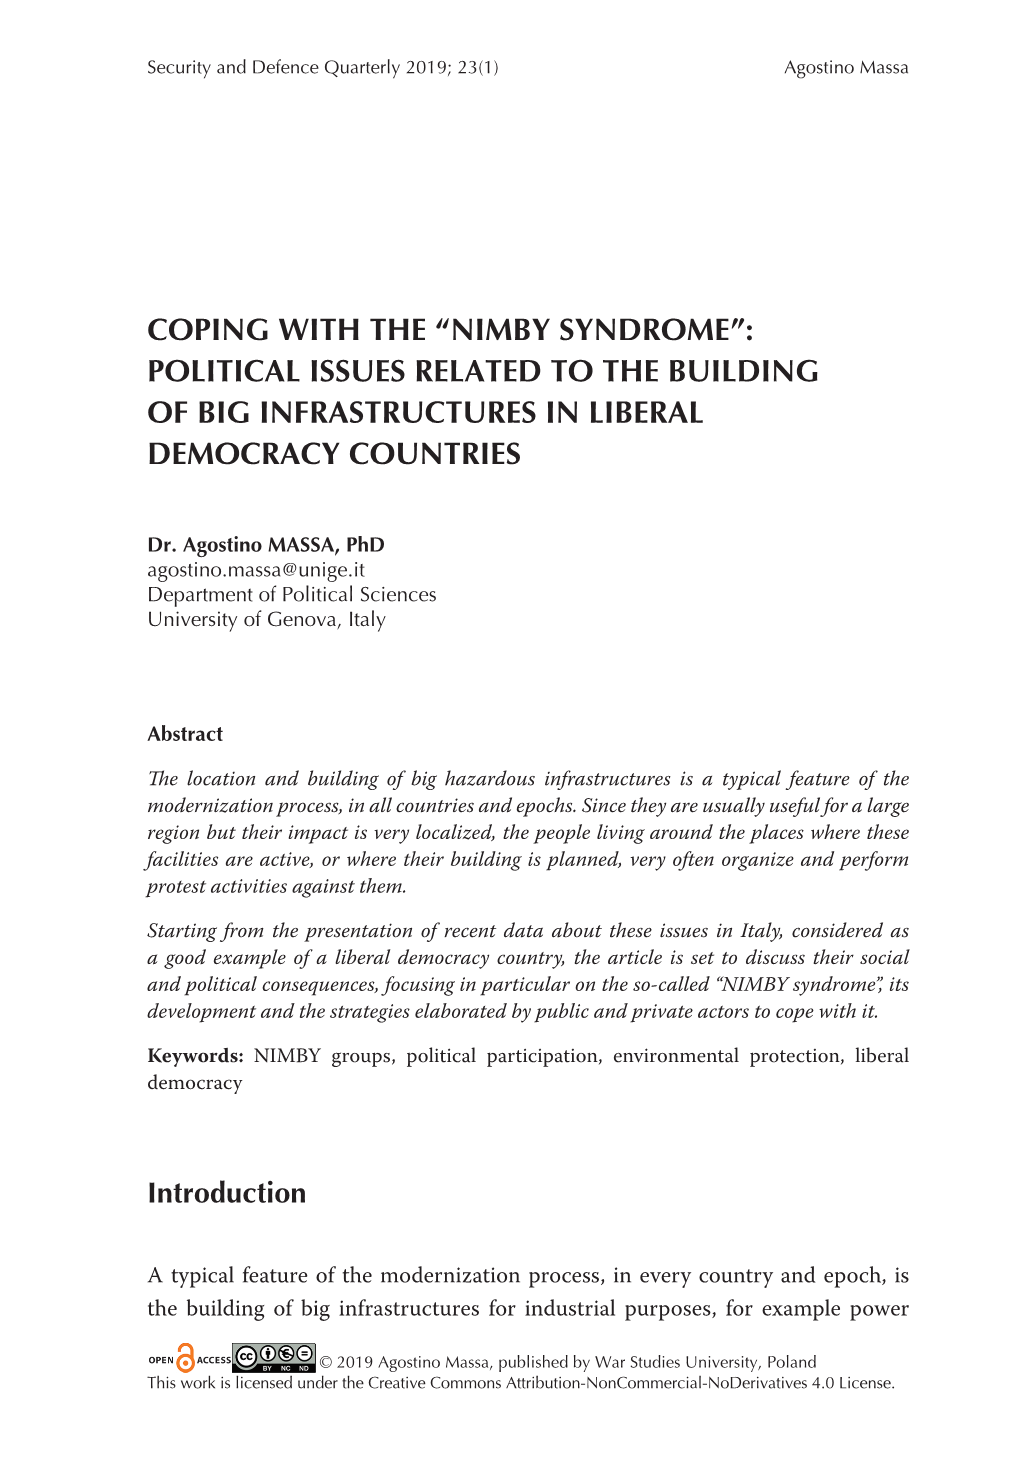 Nimby Syndrome”: Political Issues Related to the Building of Big Infrastructures in Liberal Democracy Countries